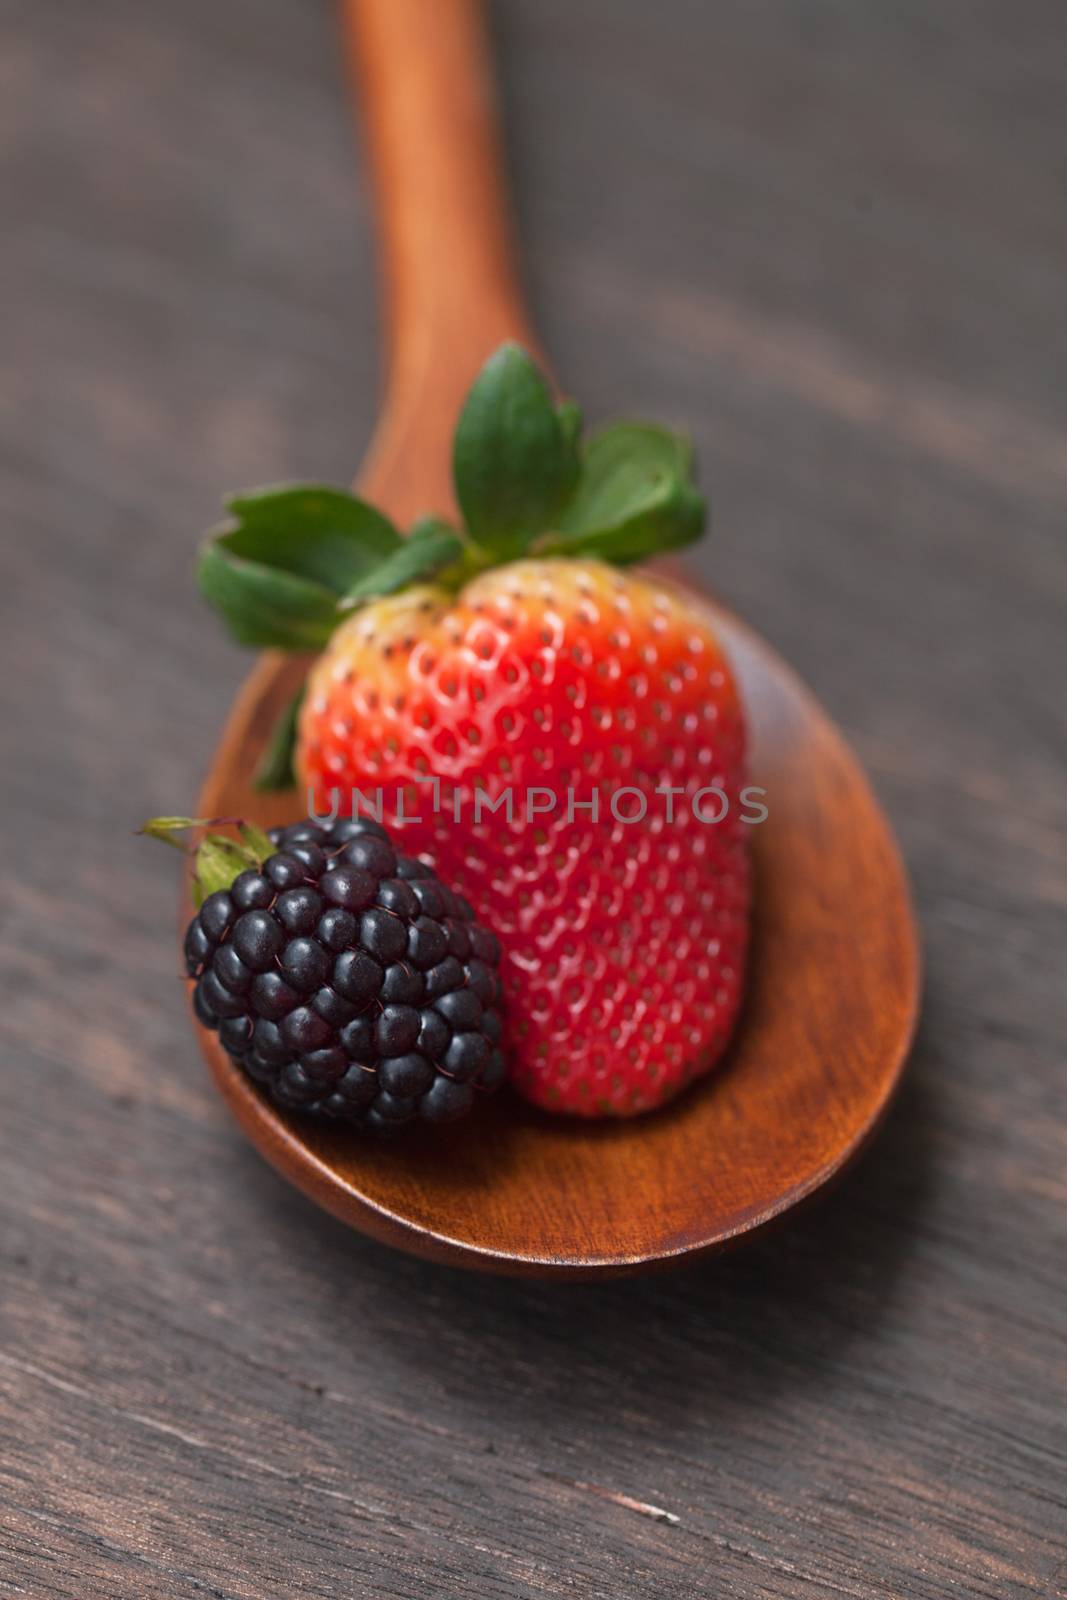 wooden spoon with strawberry and blackberry on a wooden surface by jannyjus